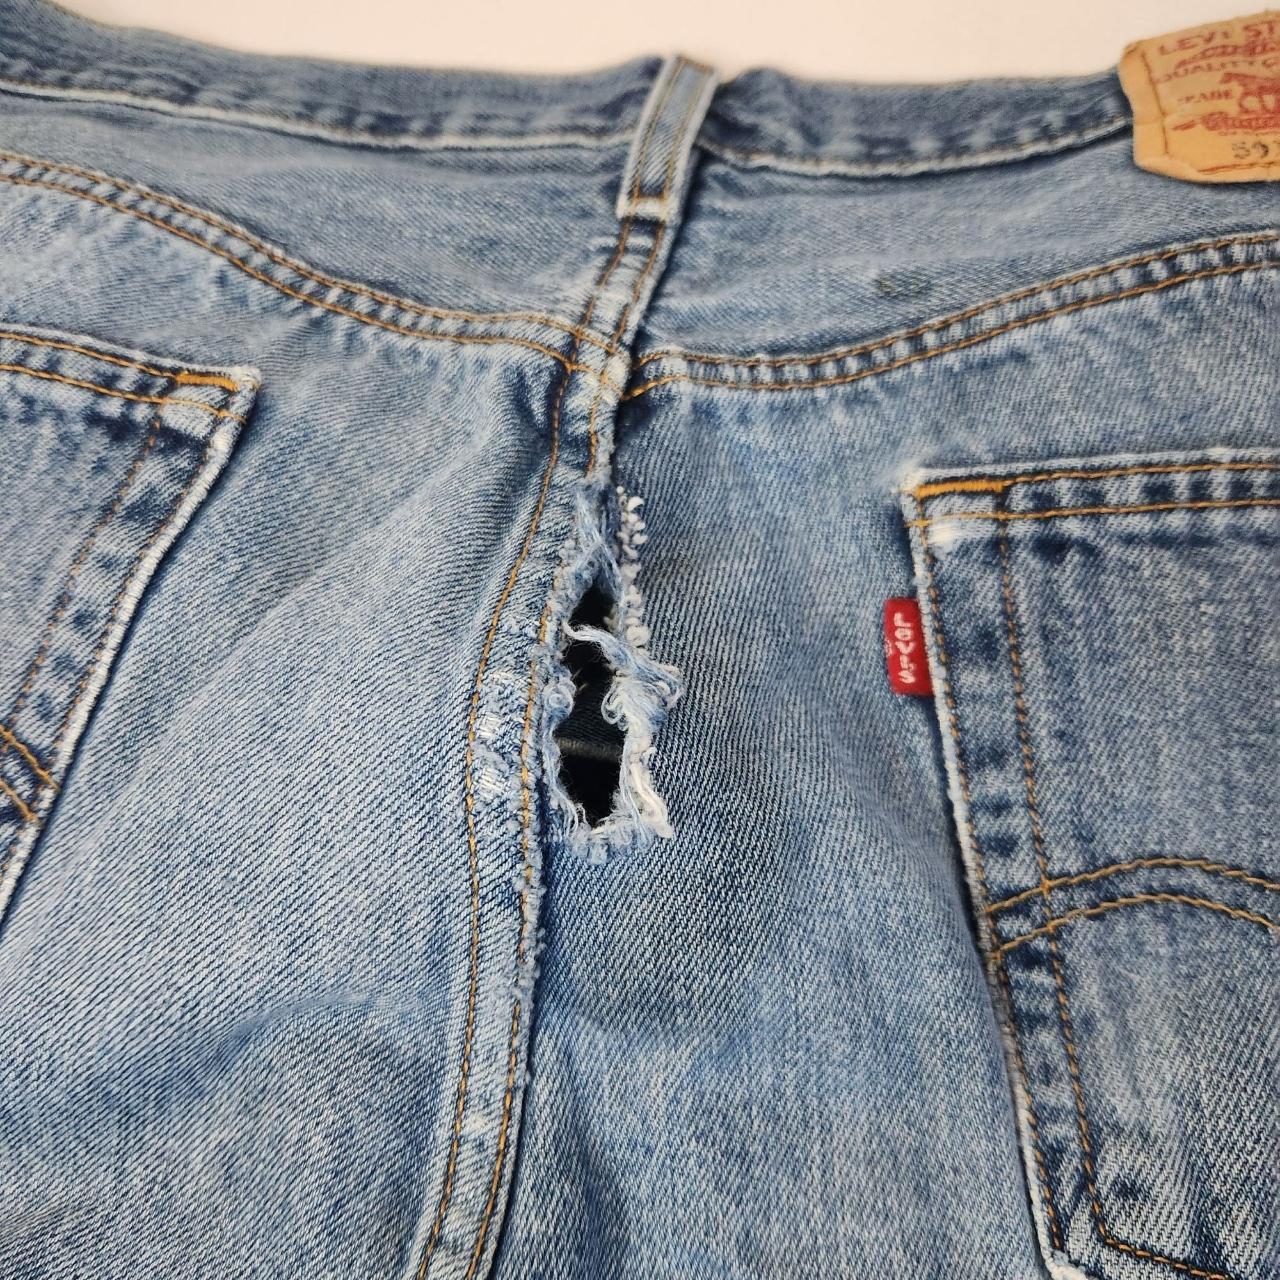 Blown out in the butt Levi's men's size 36x30. - Depop